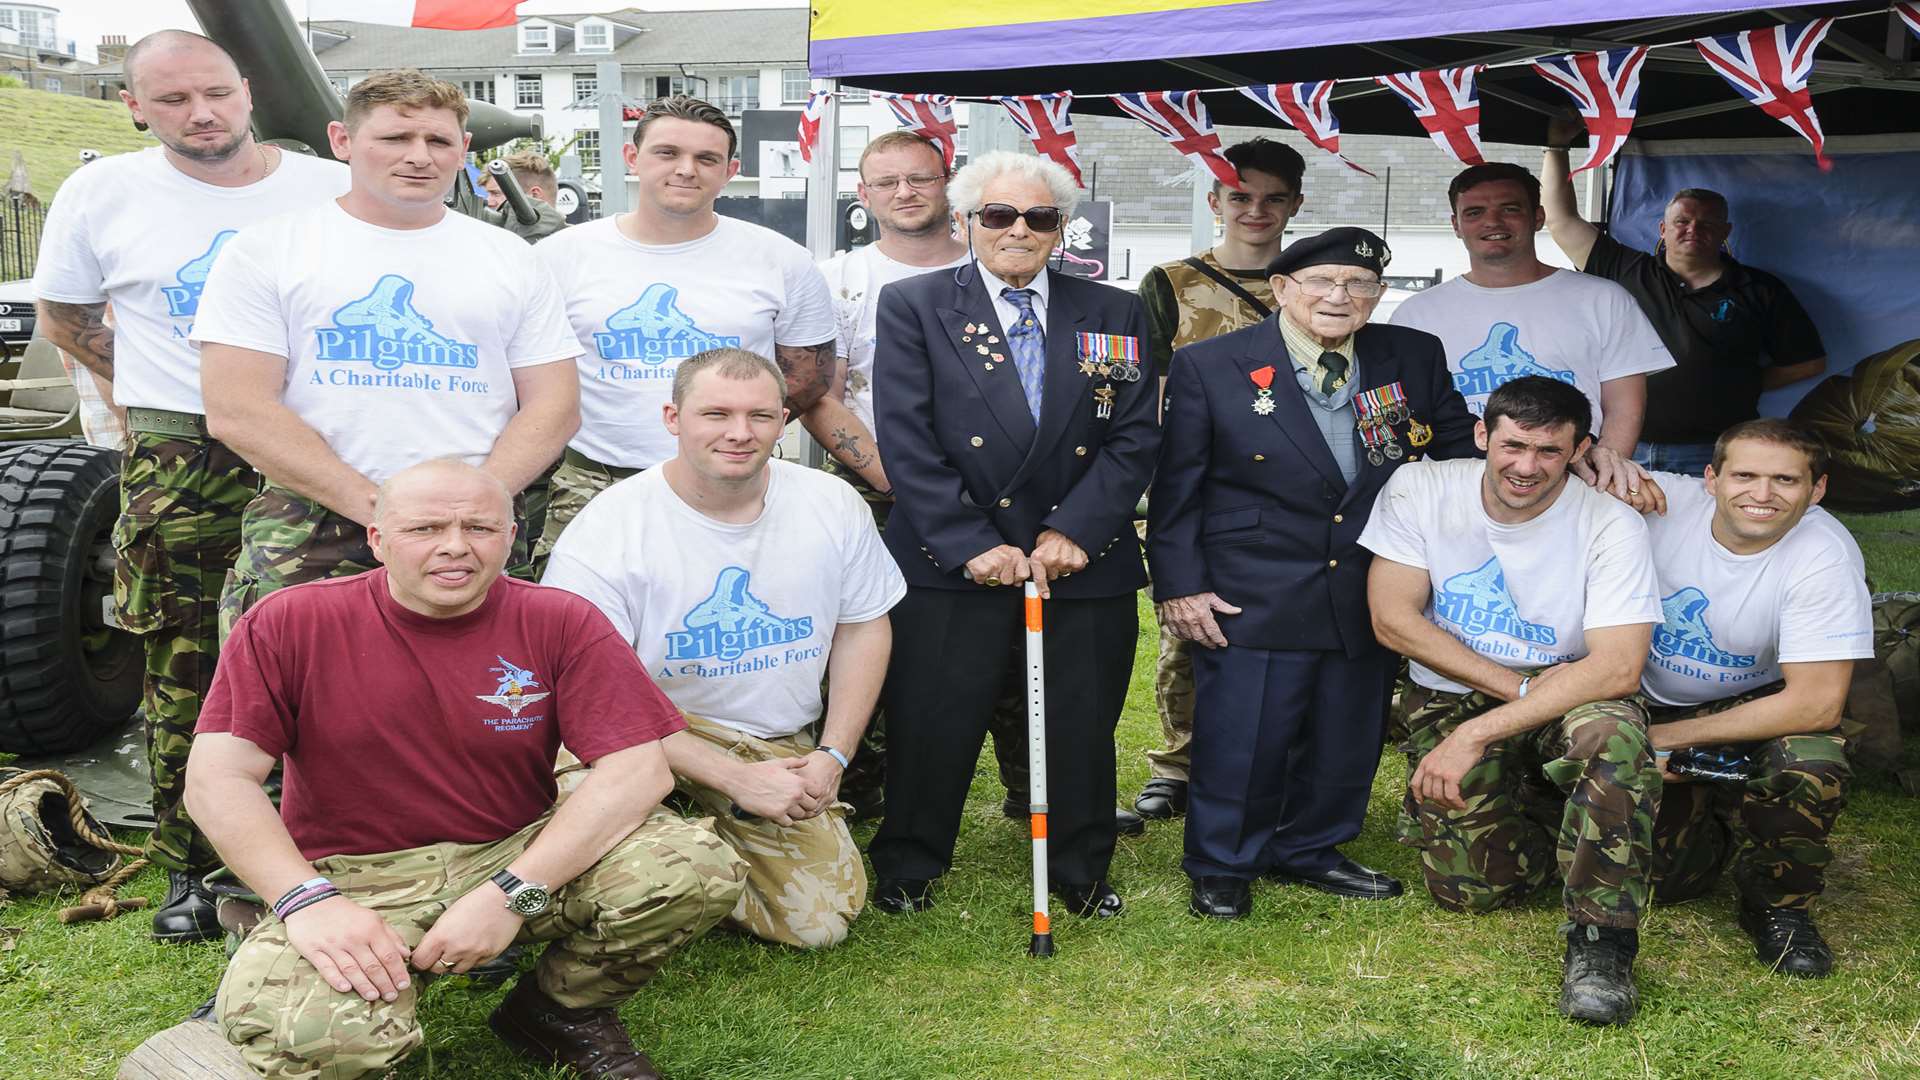 Fundraising runners the Pilgrim Bandits, in white shirts, at the end of their run from Strood to Gordon Promenade, Gravesend, with supporters and veterans. Veterans Philip Hubert, of Royal Navy Landing Craft, left, and Joe Hoadley, 49th Reconnaissance Corps.